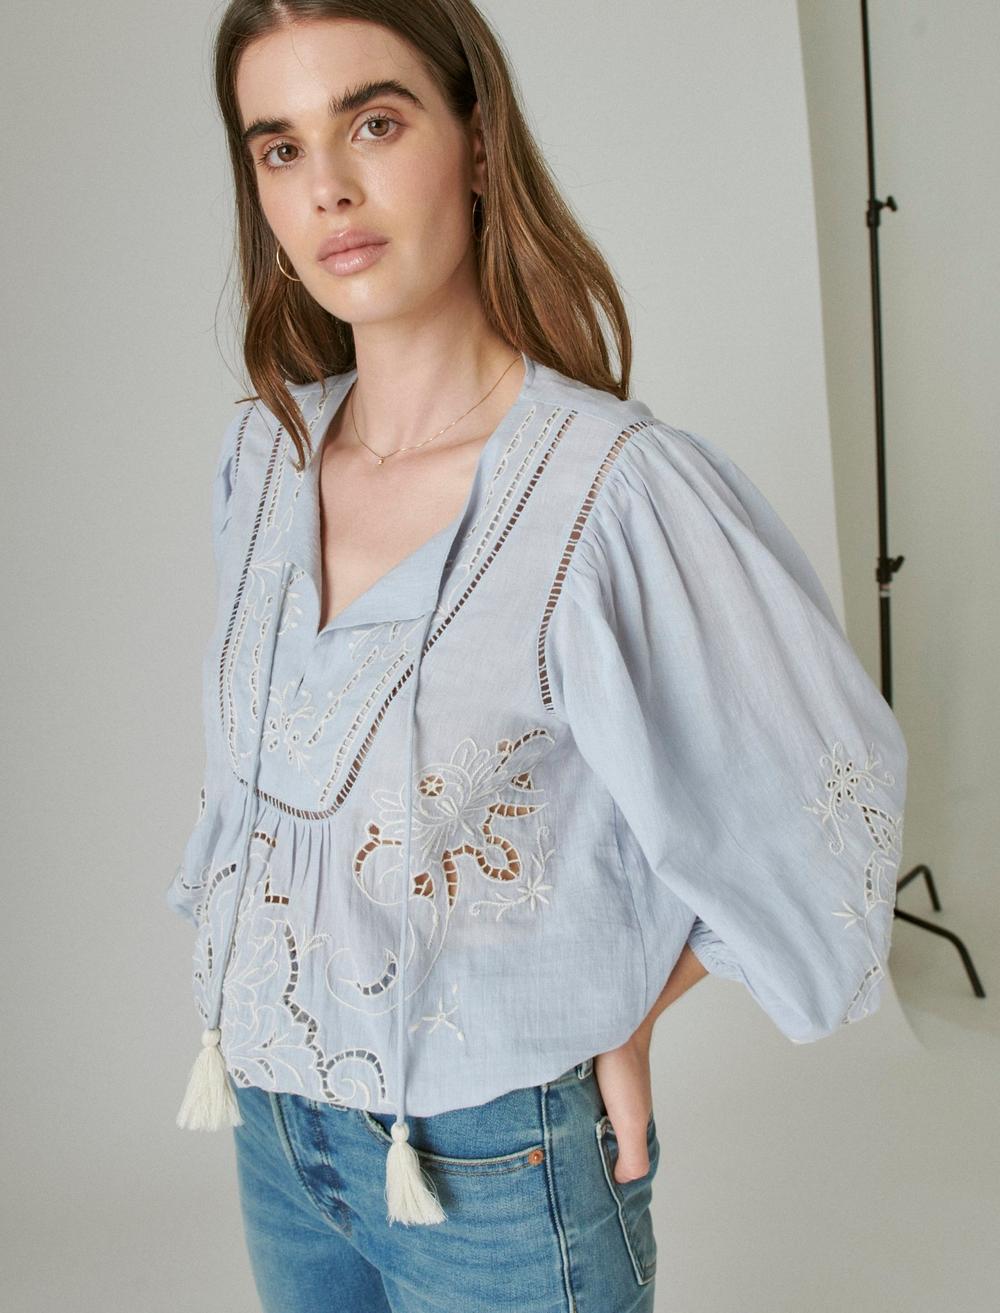 EMBROIDERED PEASANT BLOUSE, image 3